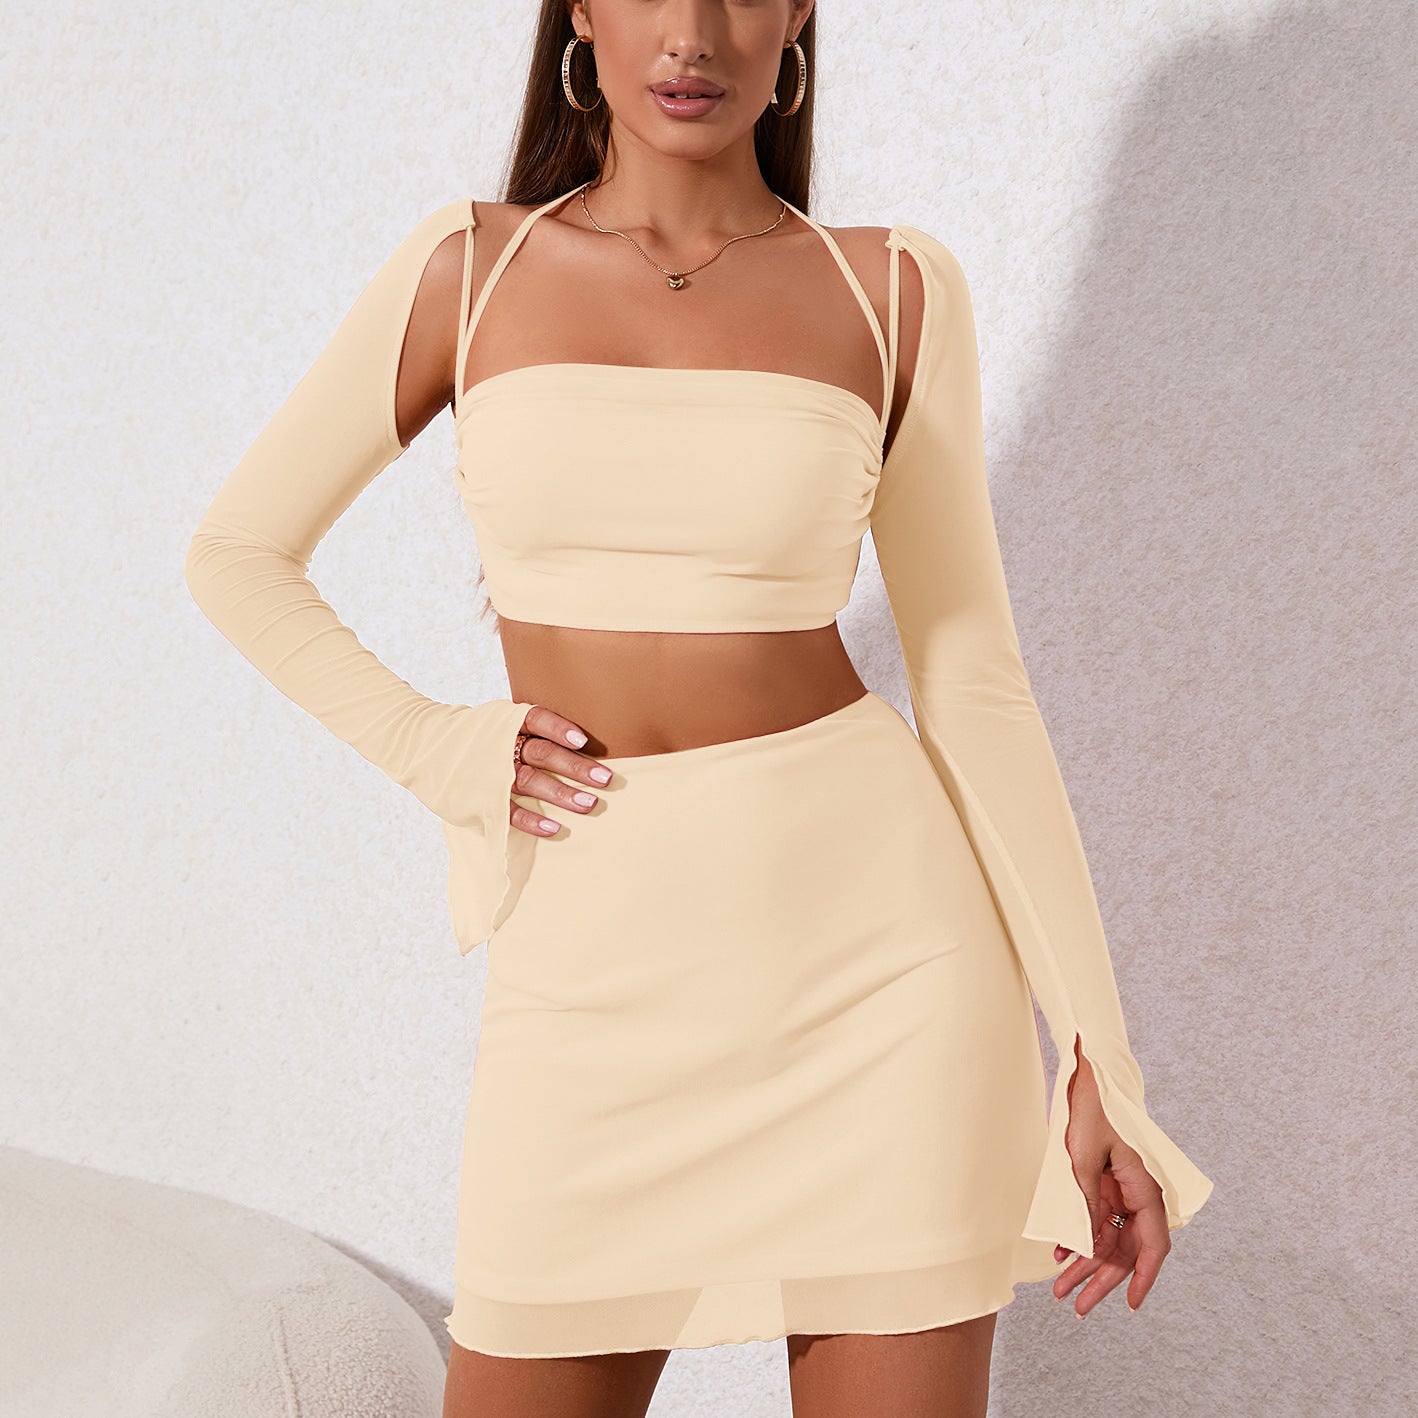 gianna top and skirt set ivory front